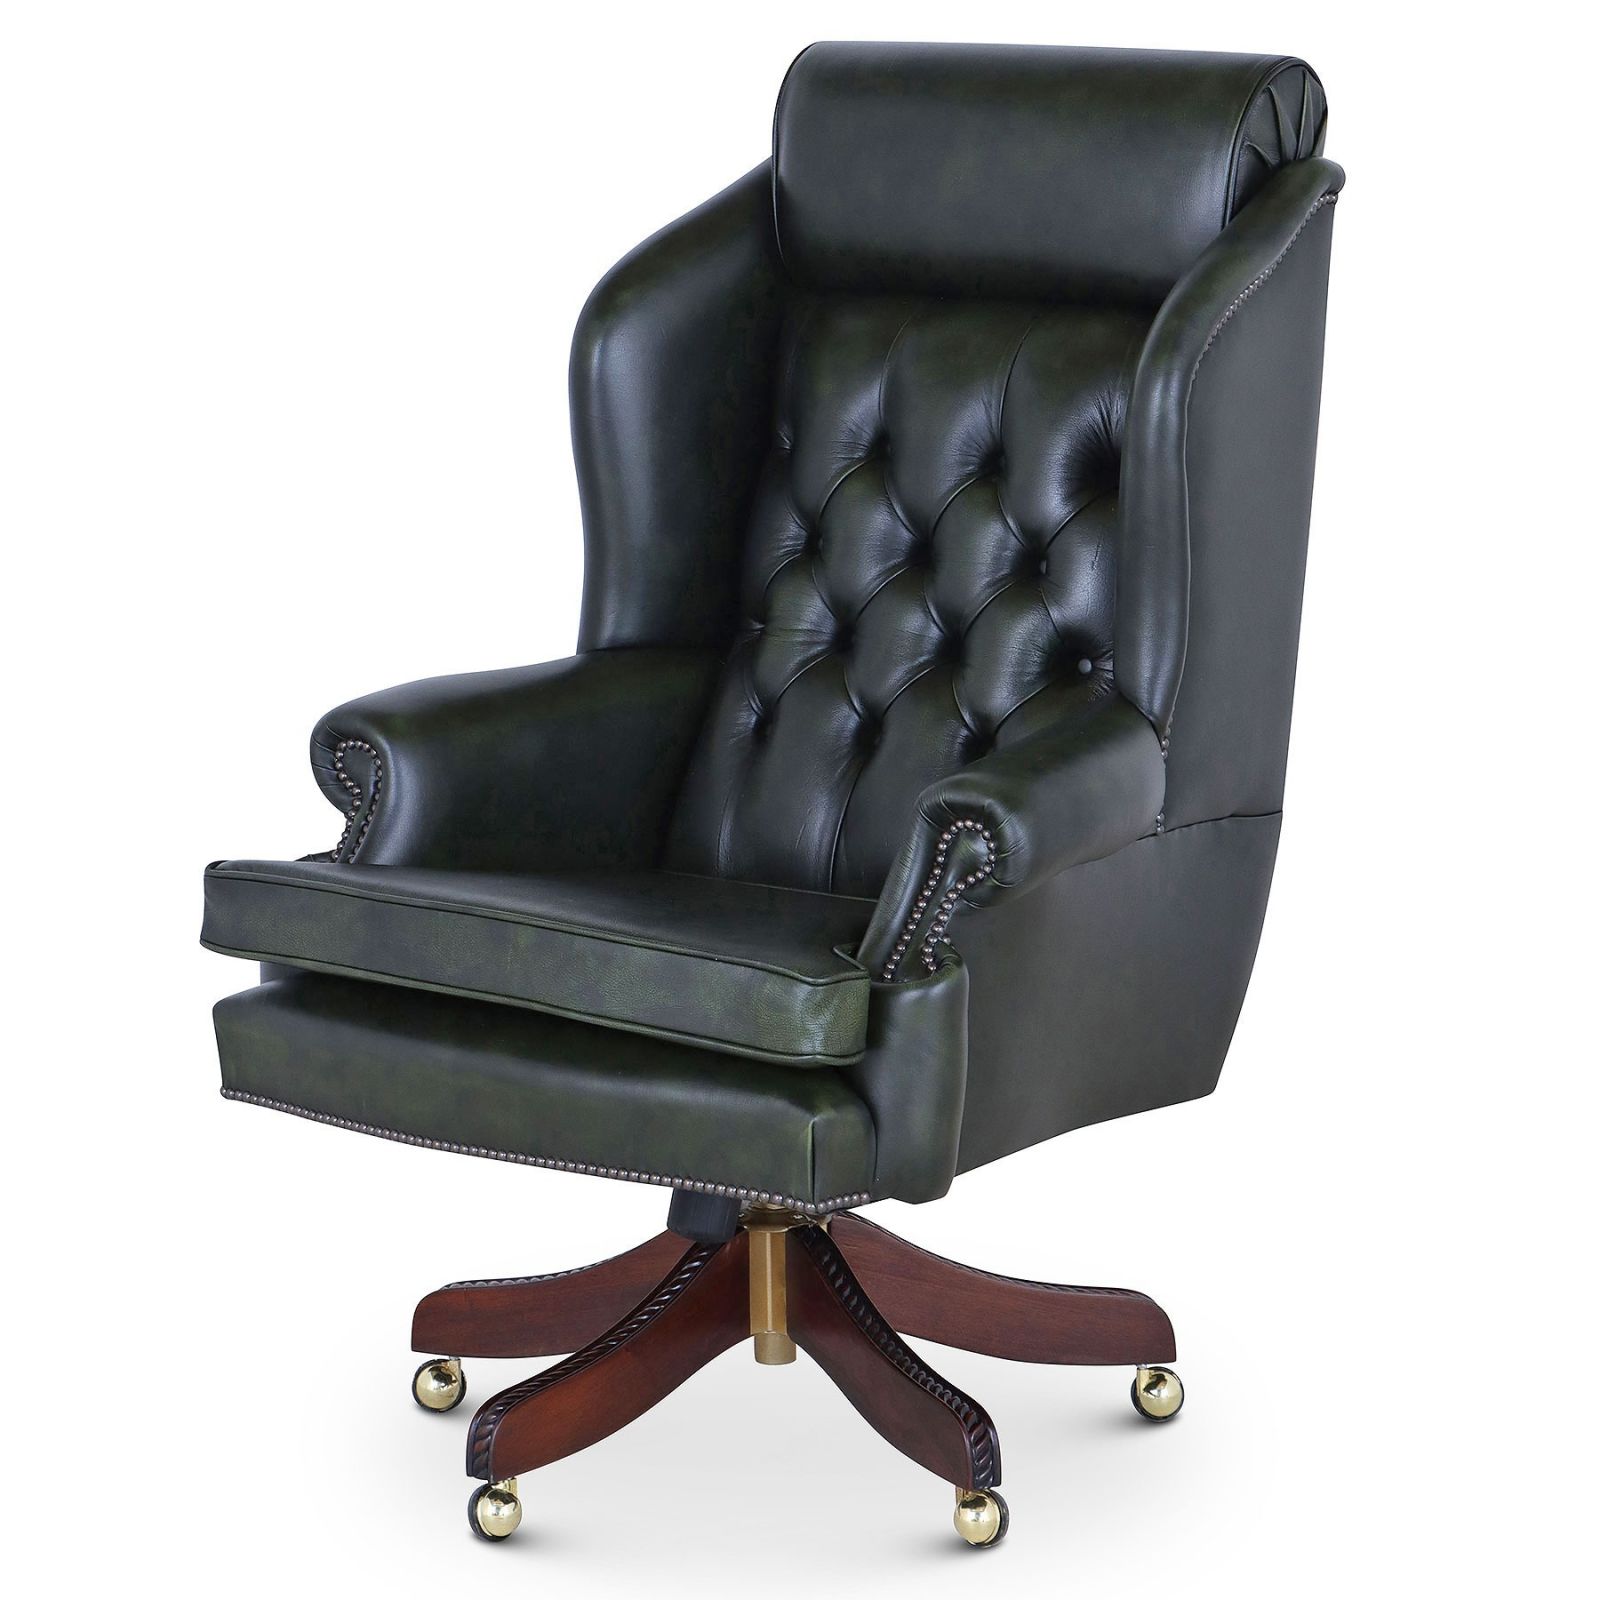 Ambassador swivel leather desk chair in dark green, Desk Chairs from